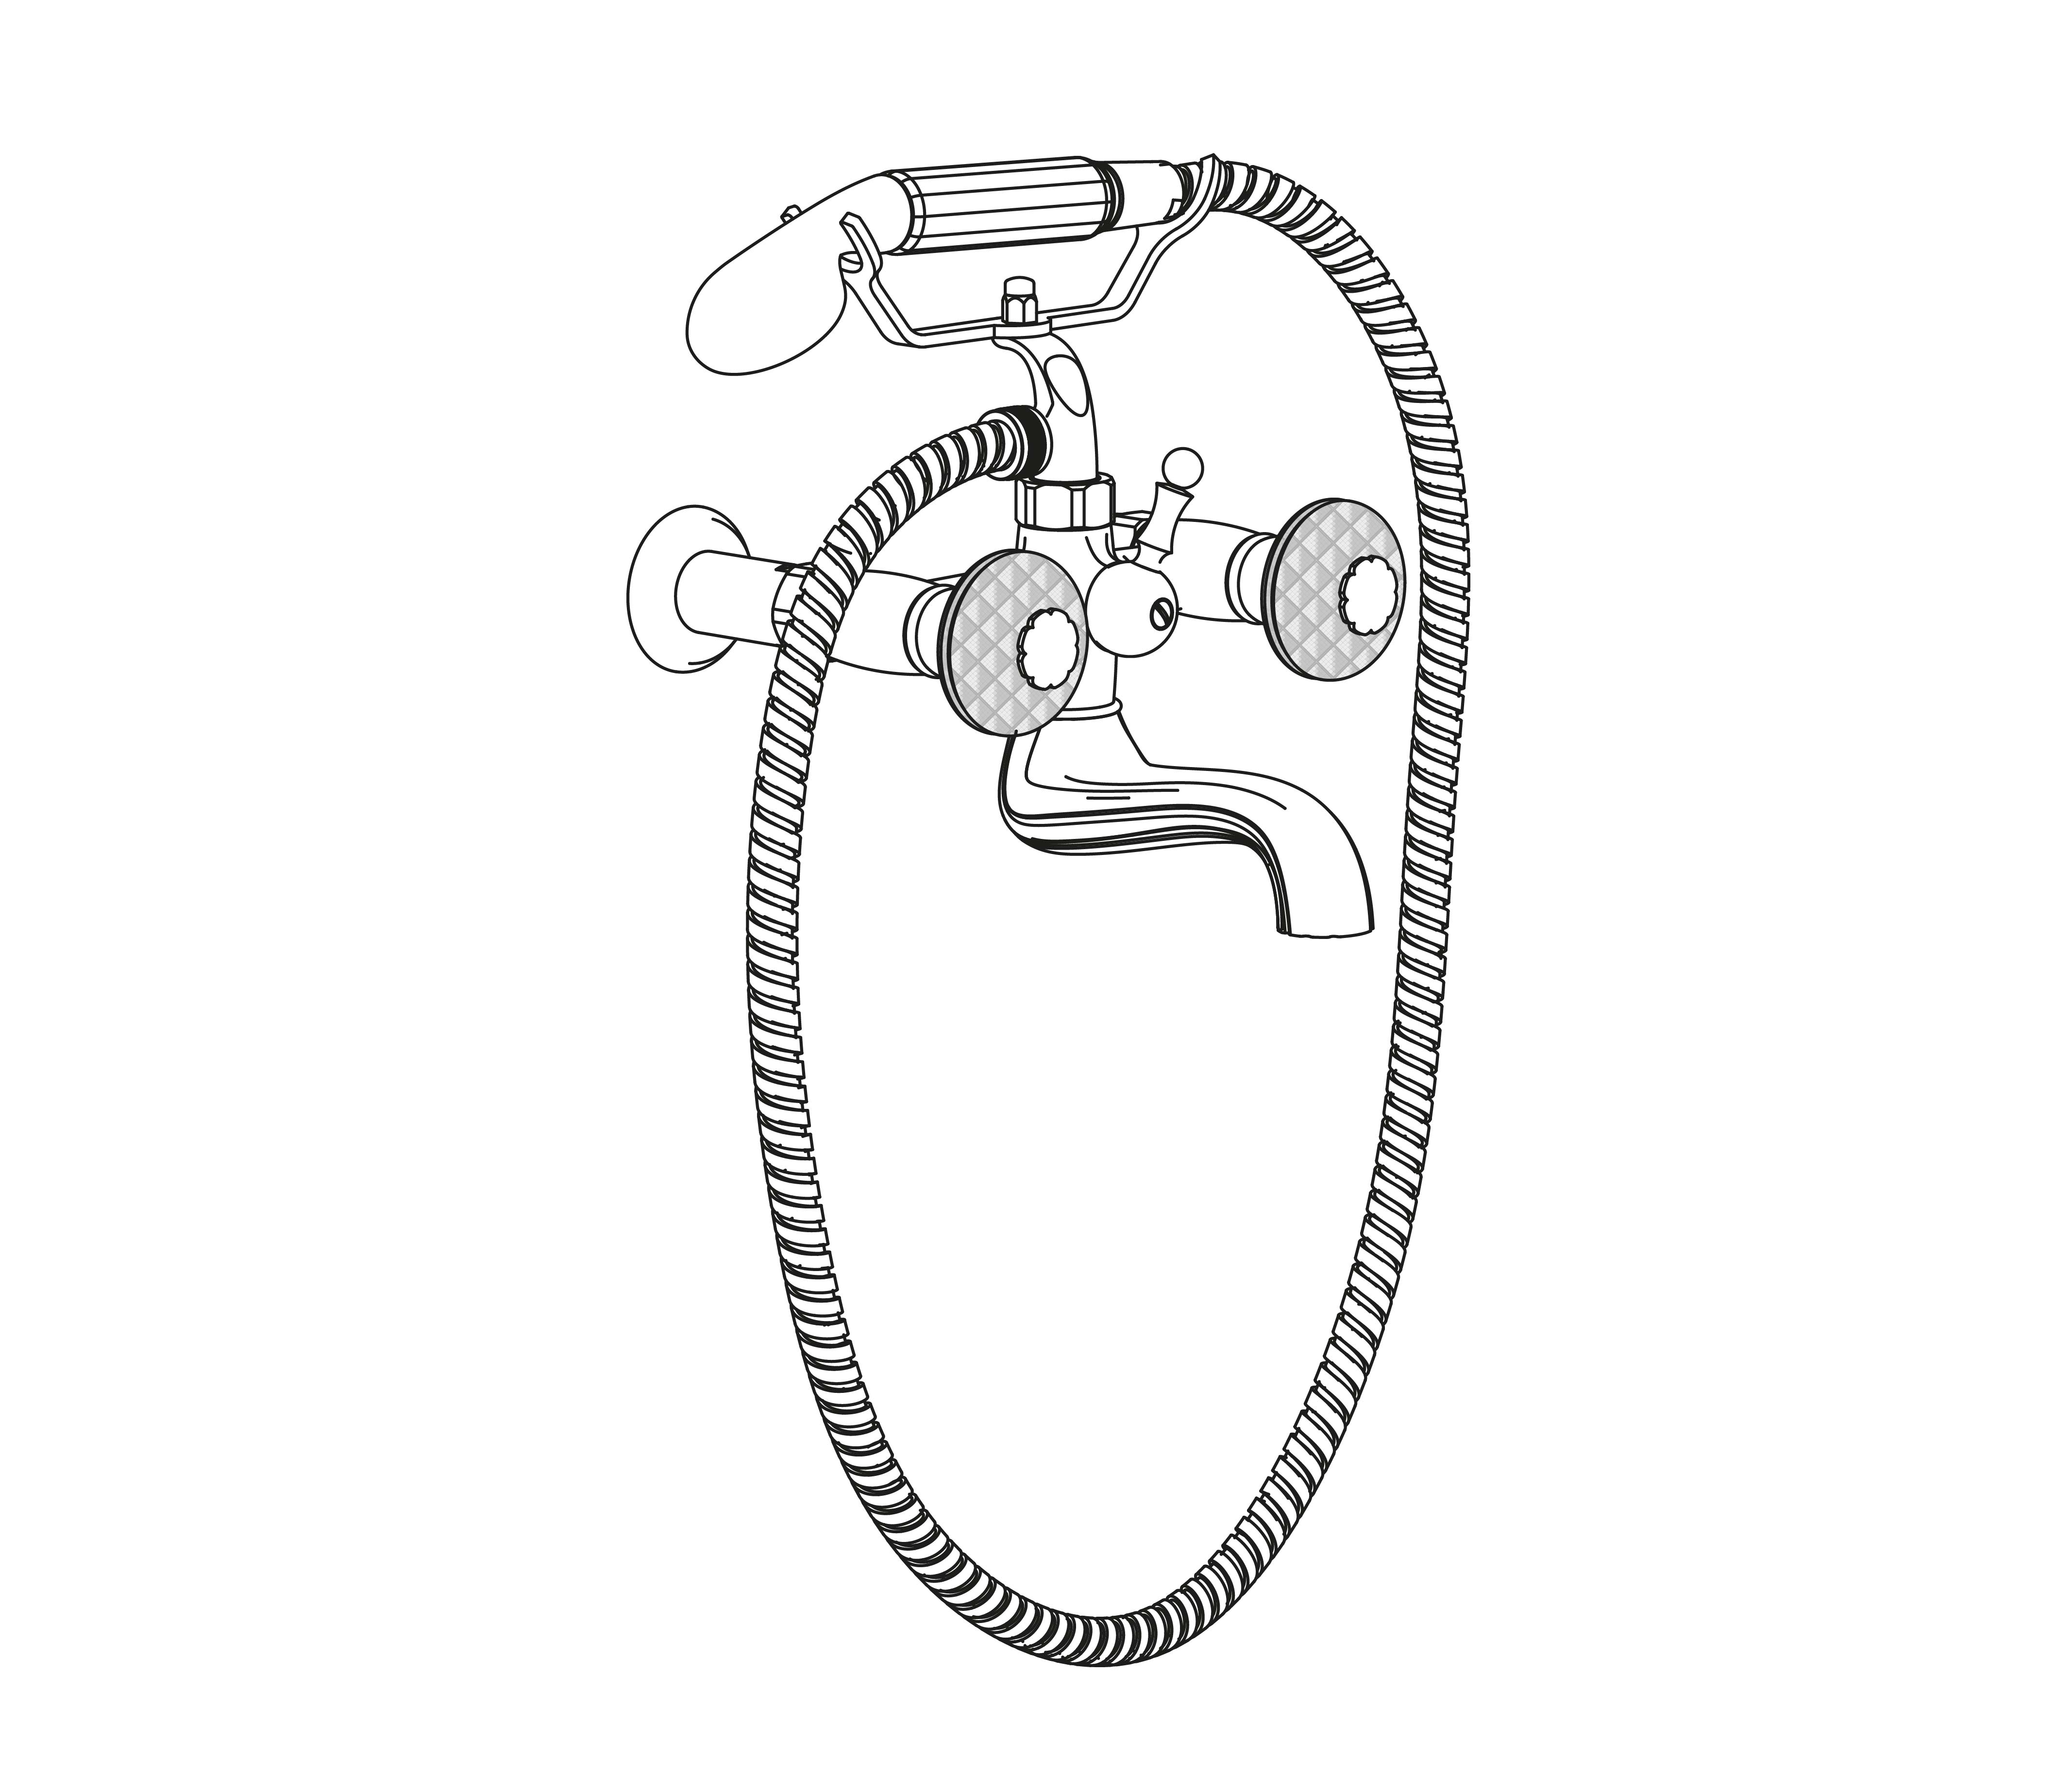 C53-3201 Wall mounted bath and shower mixer